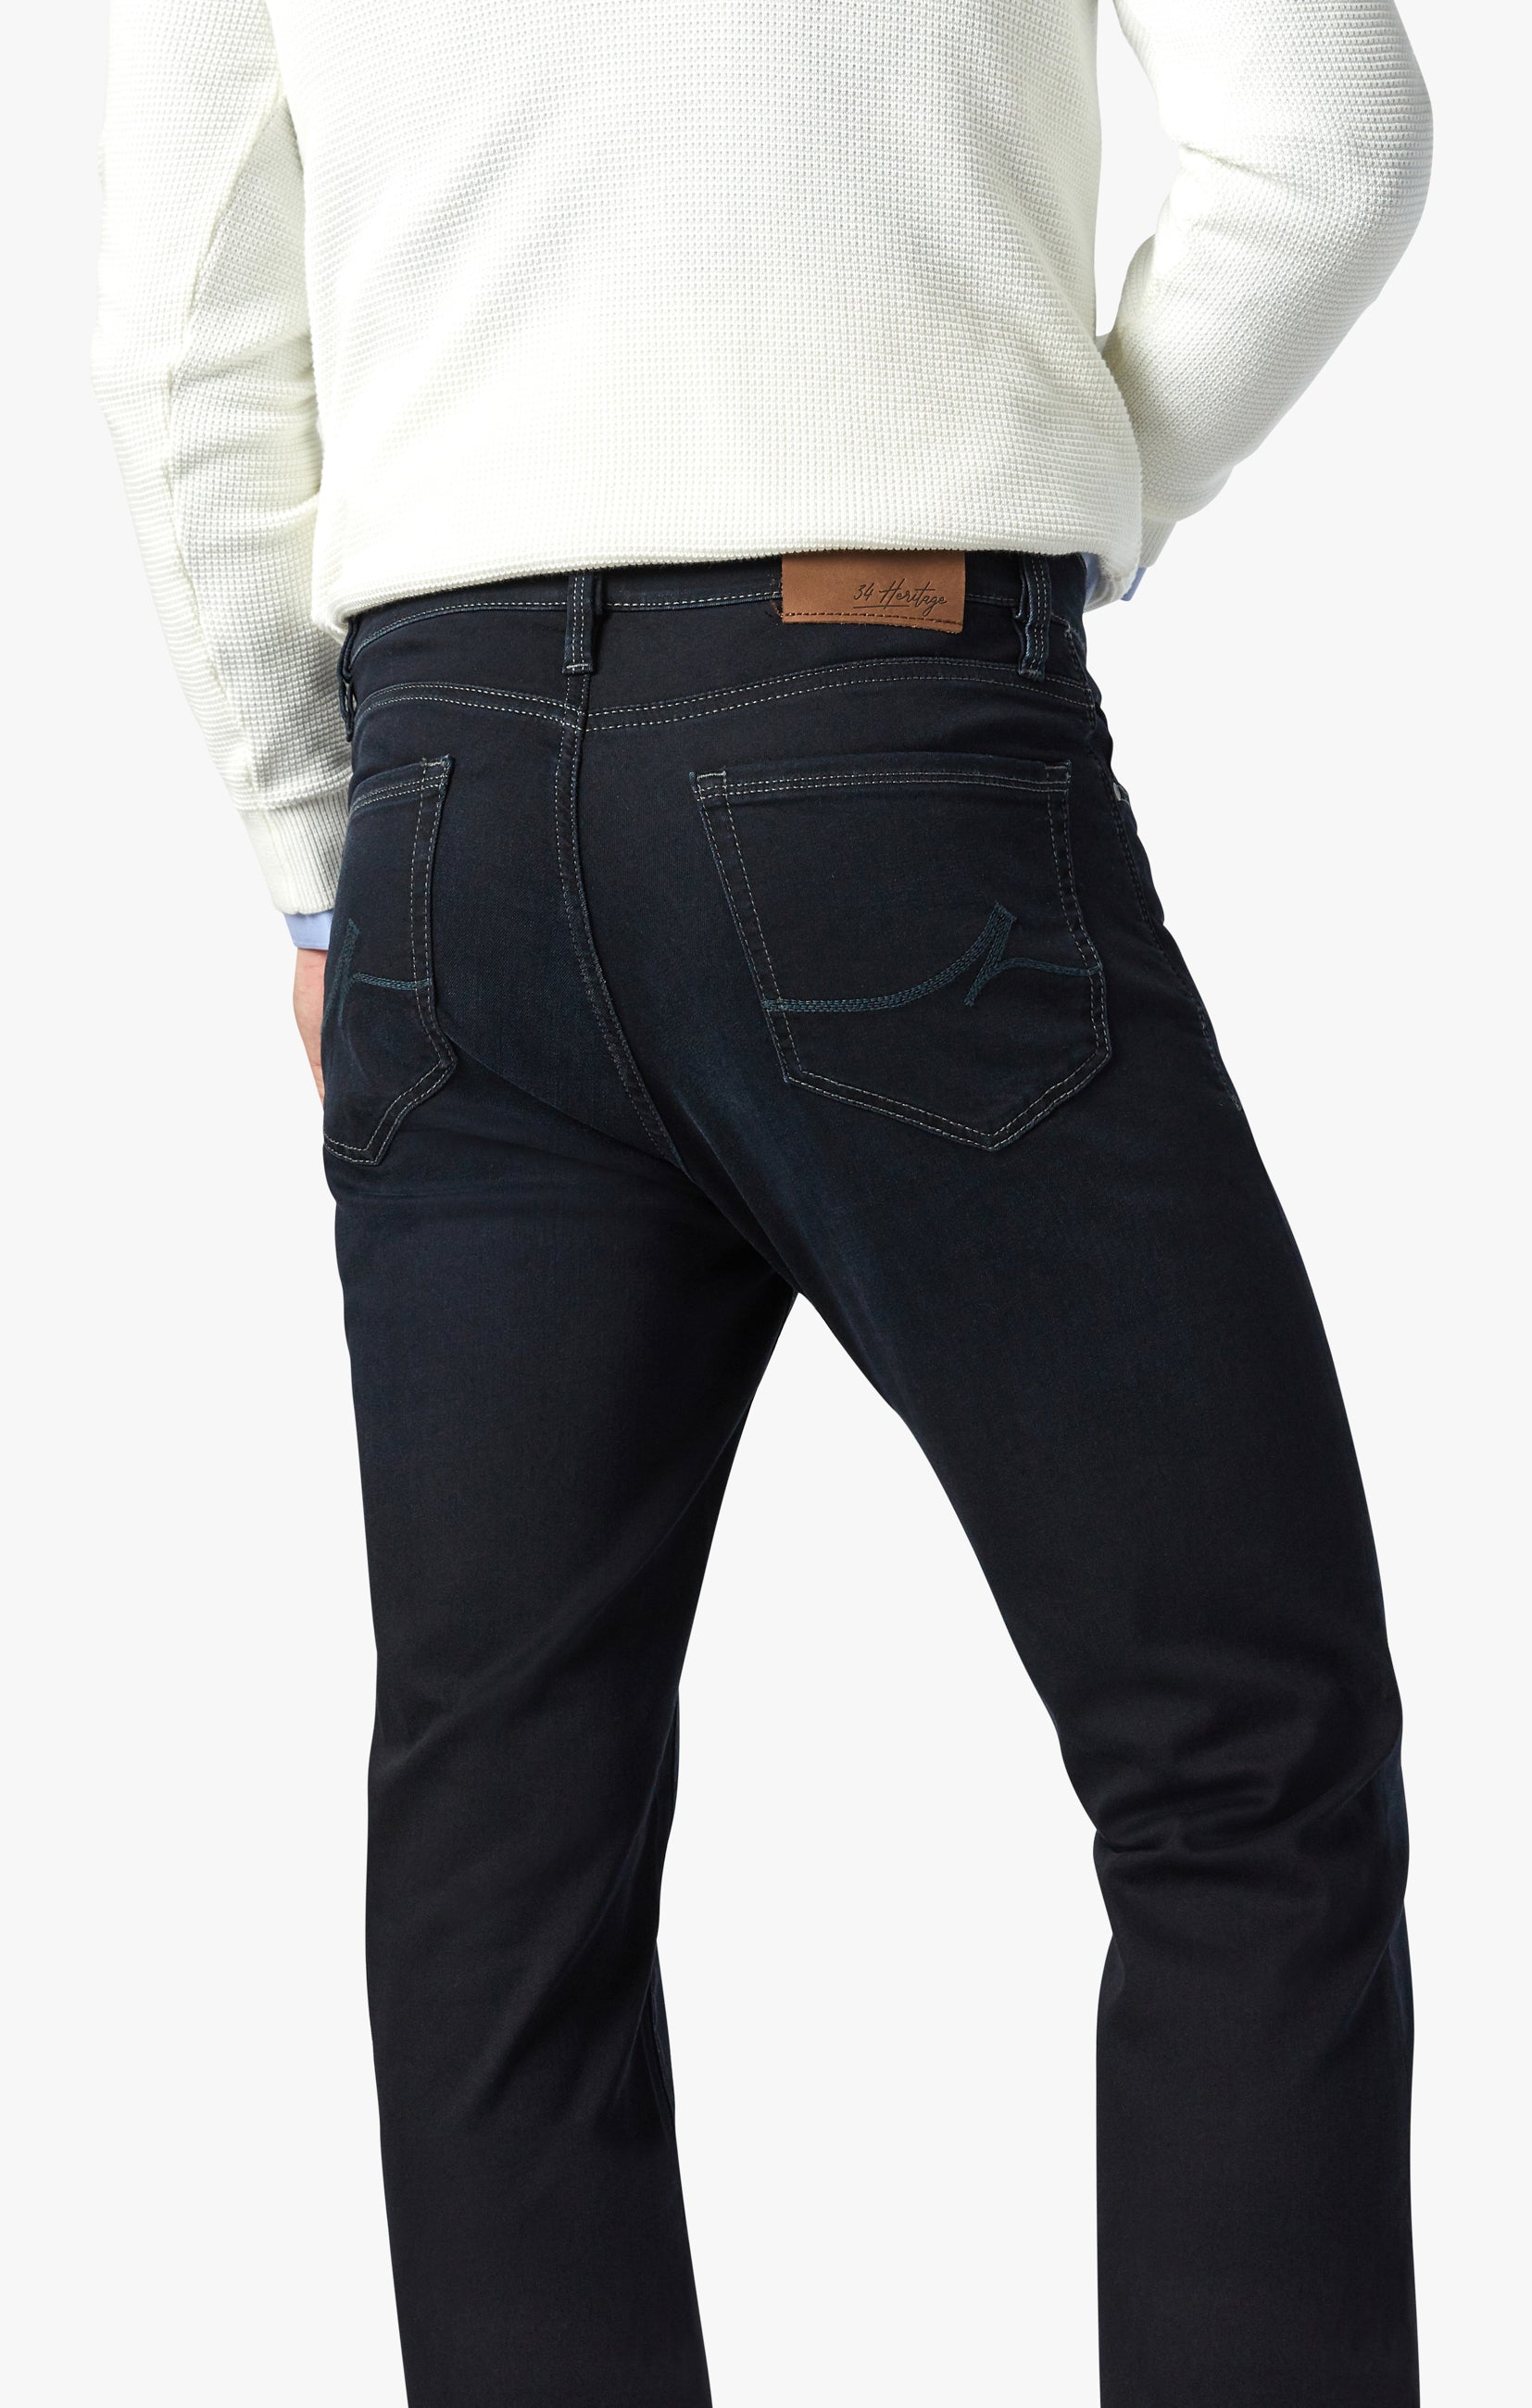 Champ Athletic Fit Jeans in Midnight Austin – 34 Heritage